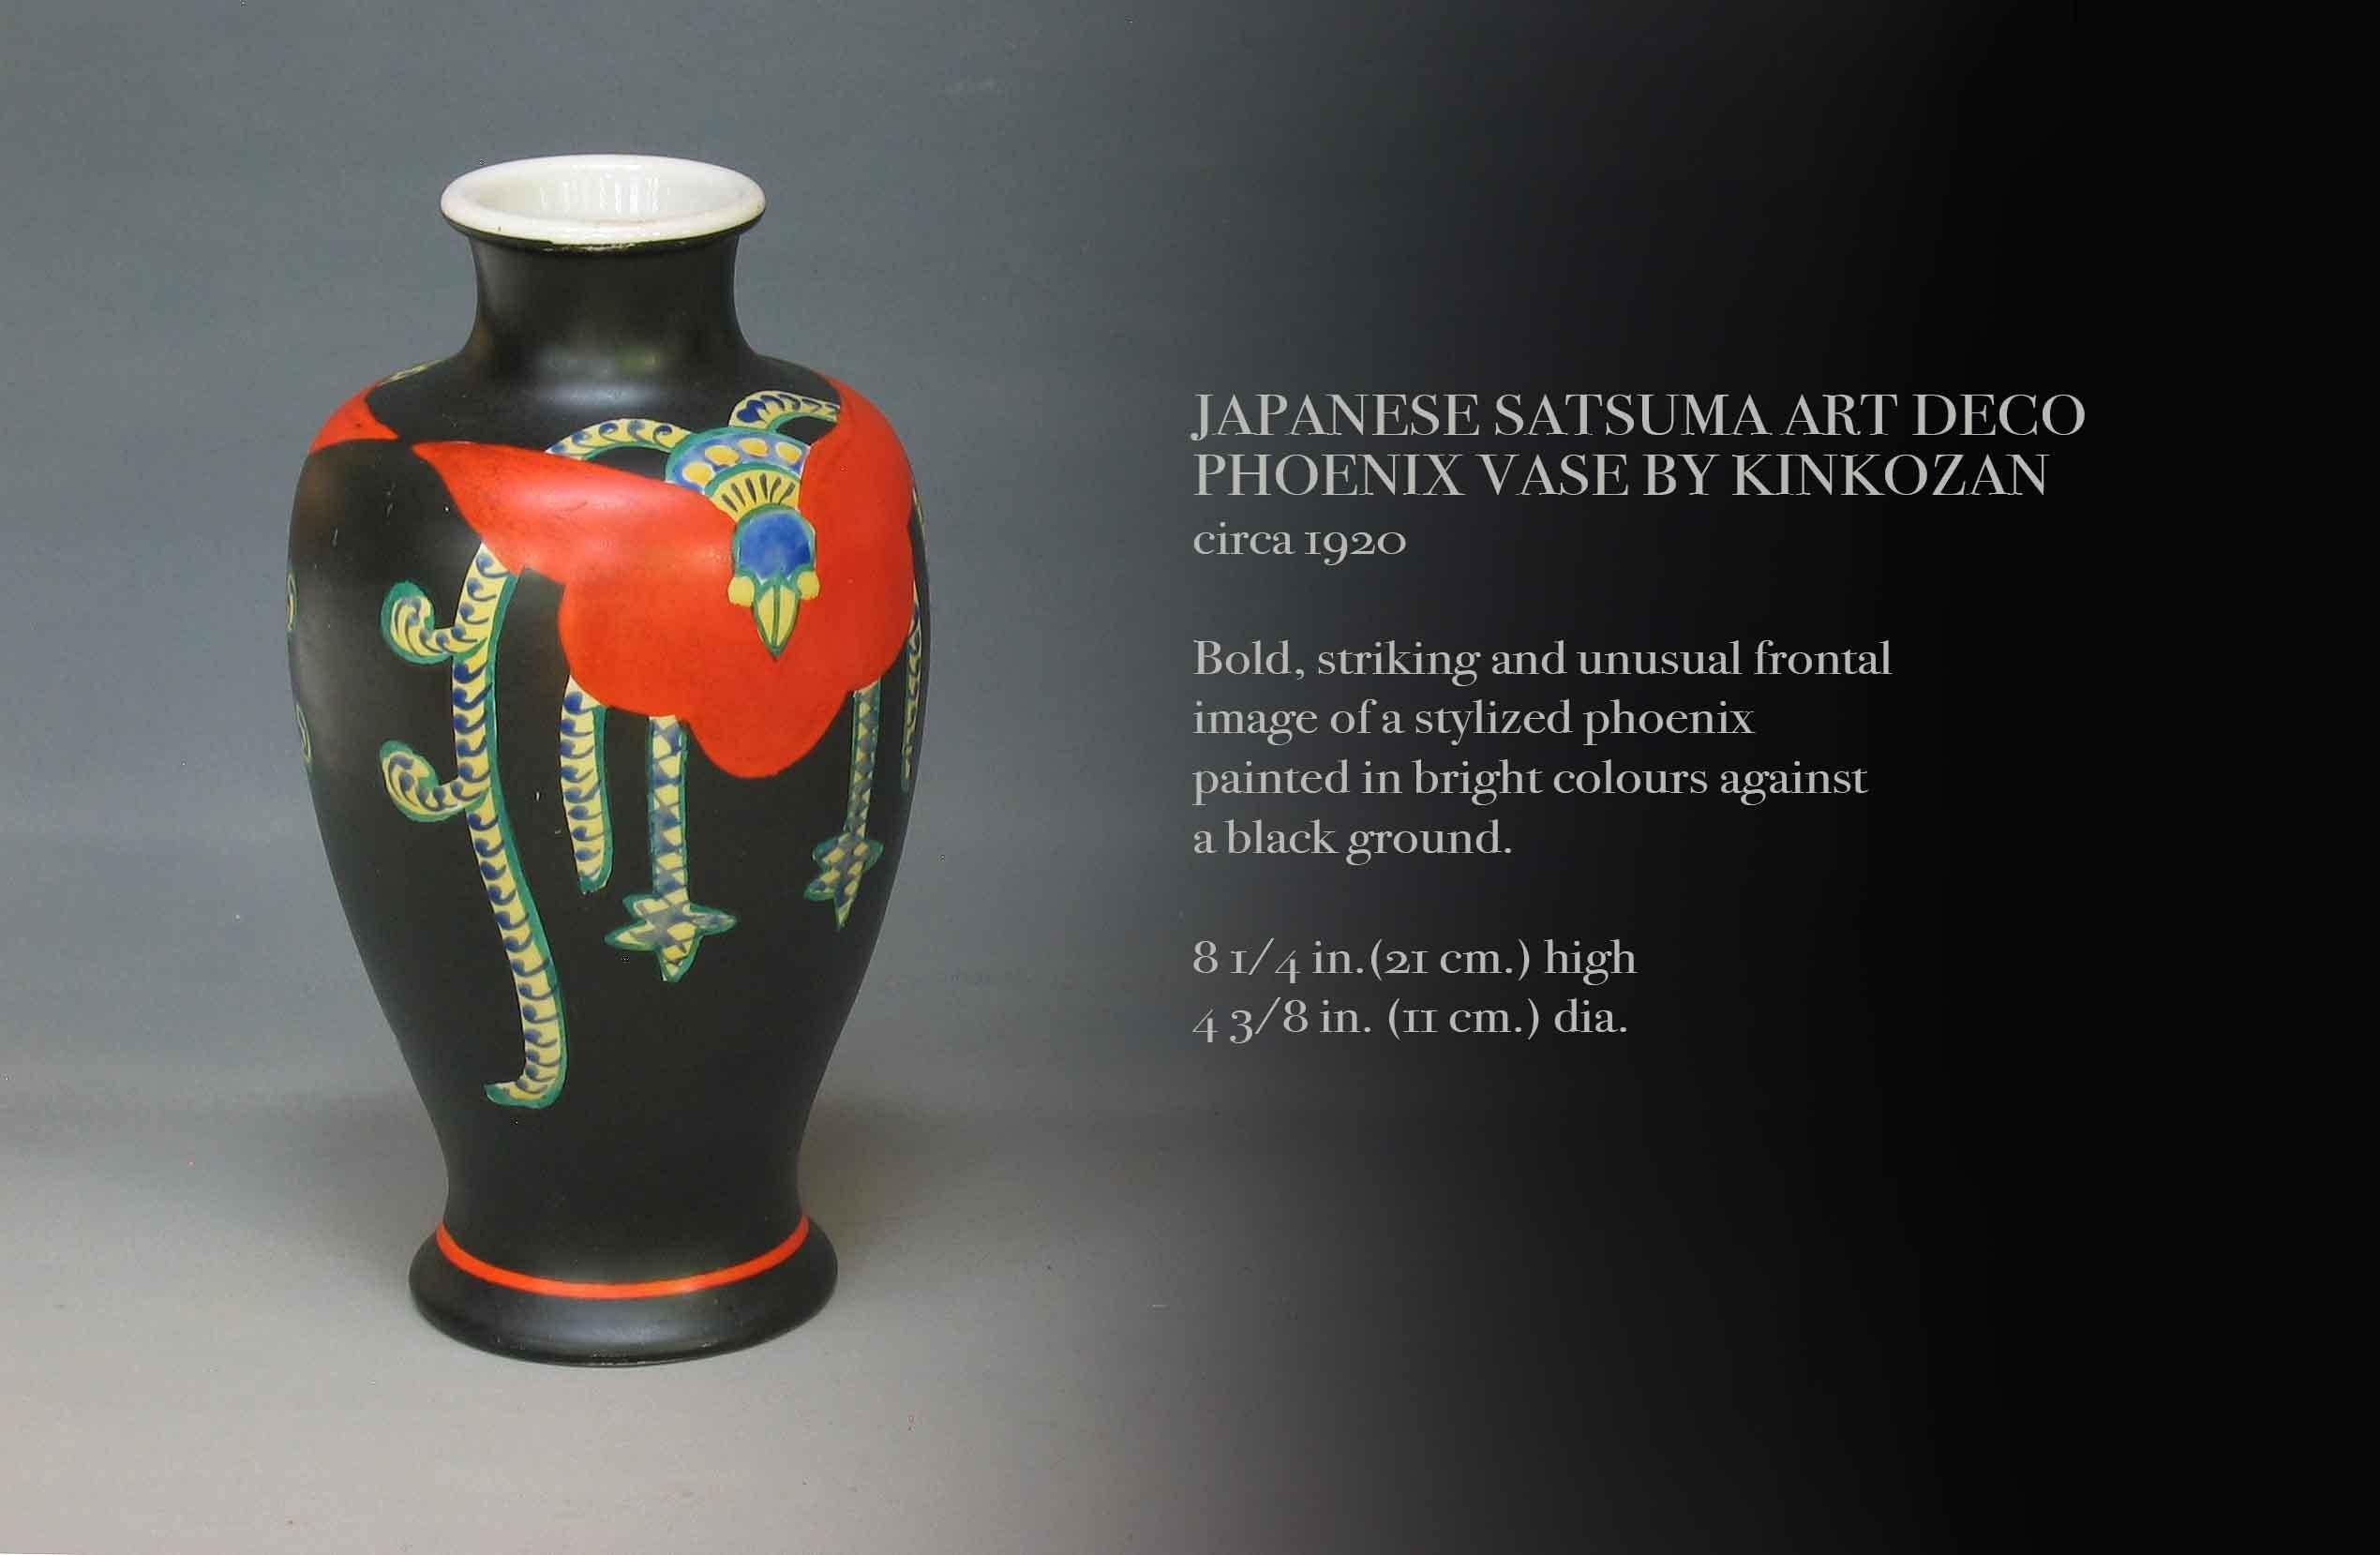 JAPANESE SATSUMA ART DECO
PHOENIX VASE BY KINKOZAN
Circa 1920

Bold, striking and unusual frontal
image of a stylized phoenix
painted in bright colours against
a black ground.

8 1/4